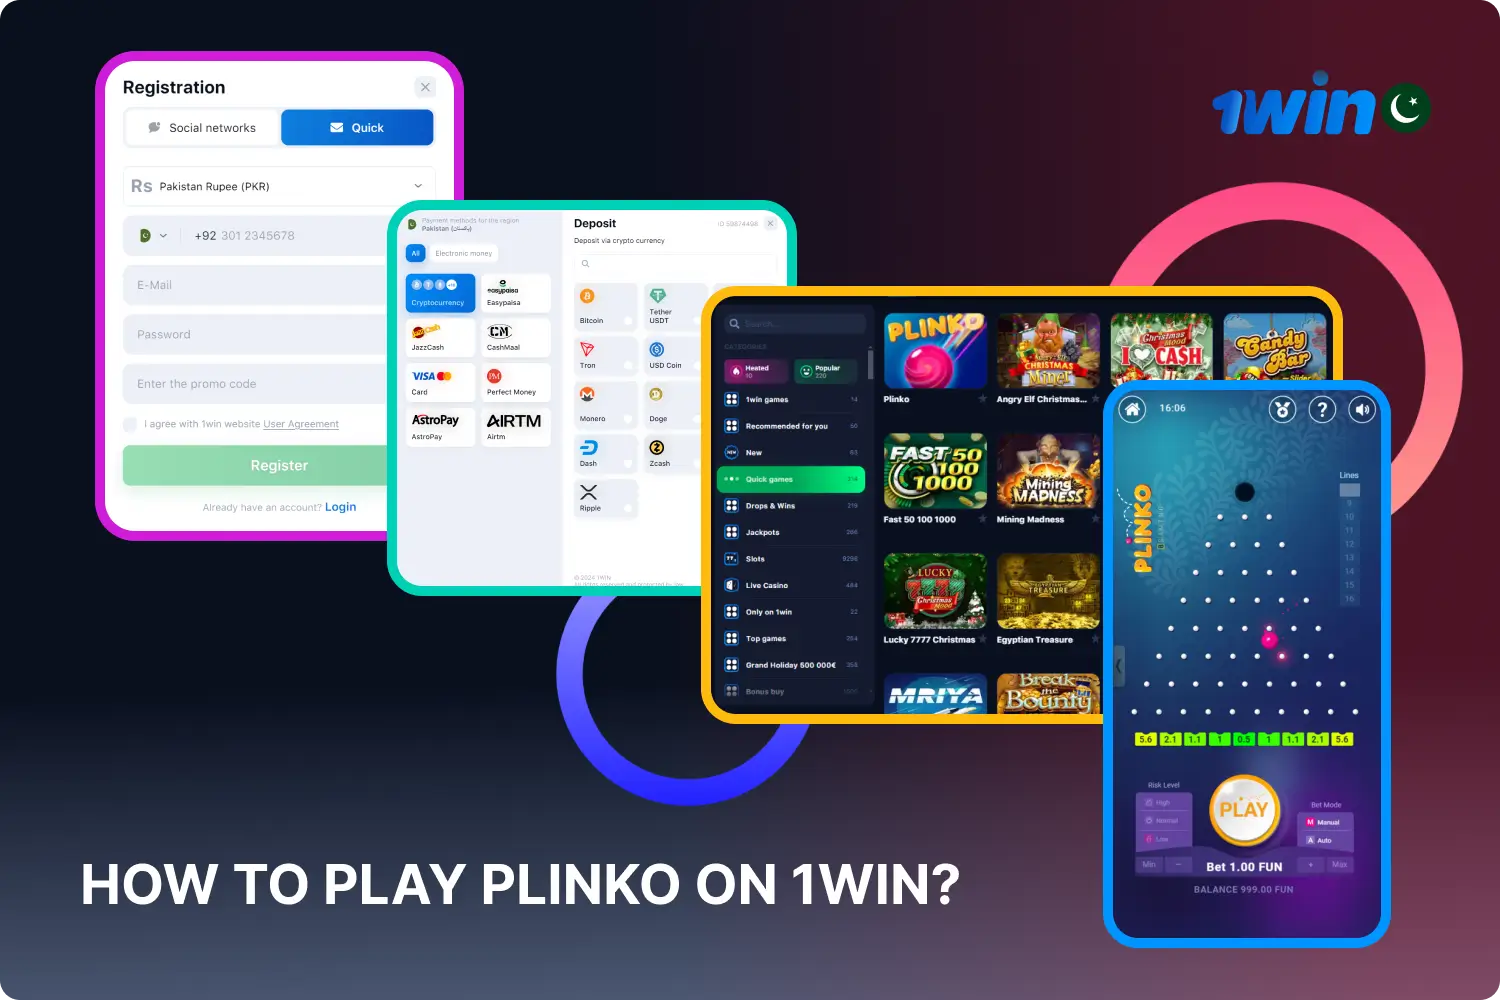 To play 1win Plinko for real money, users need to register and make a deposit